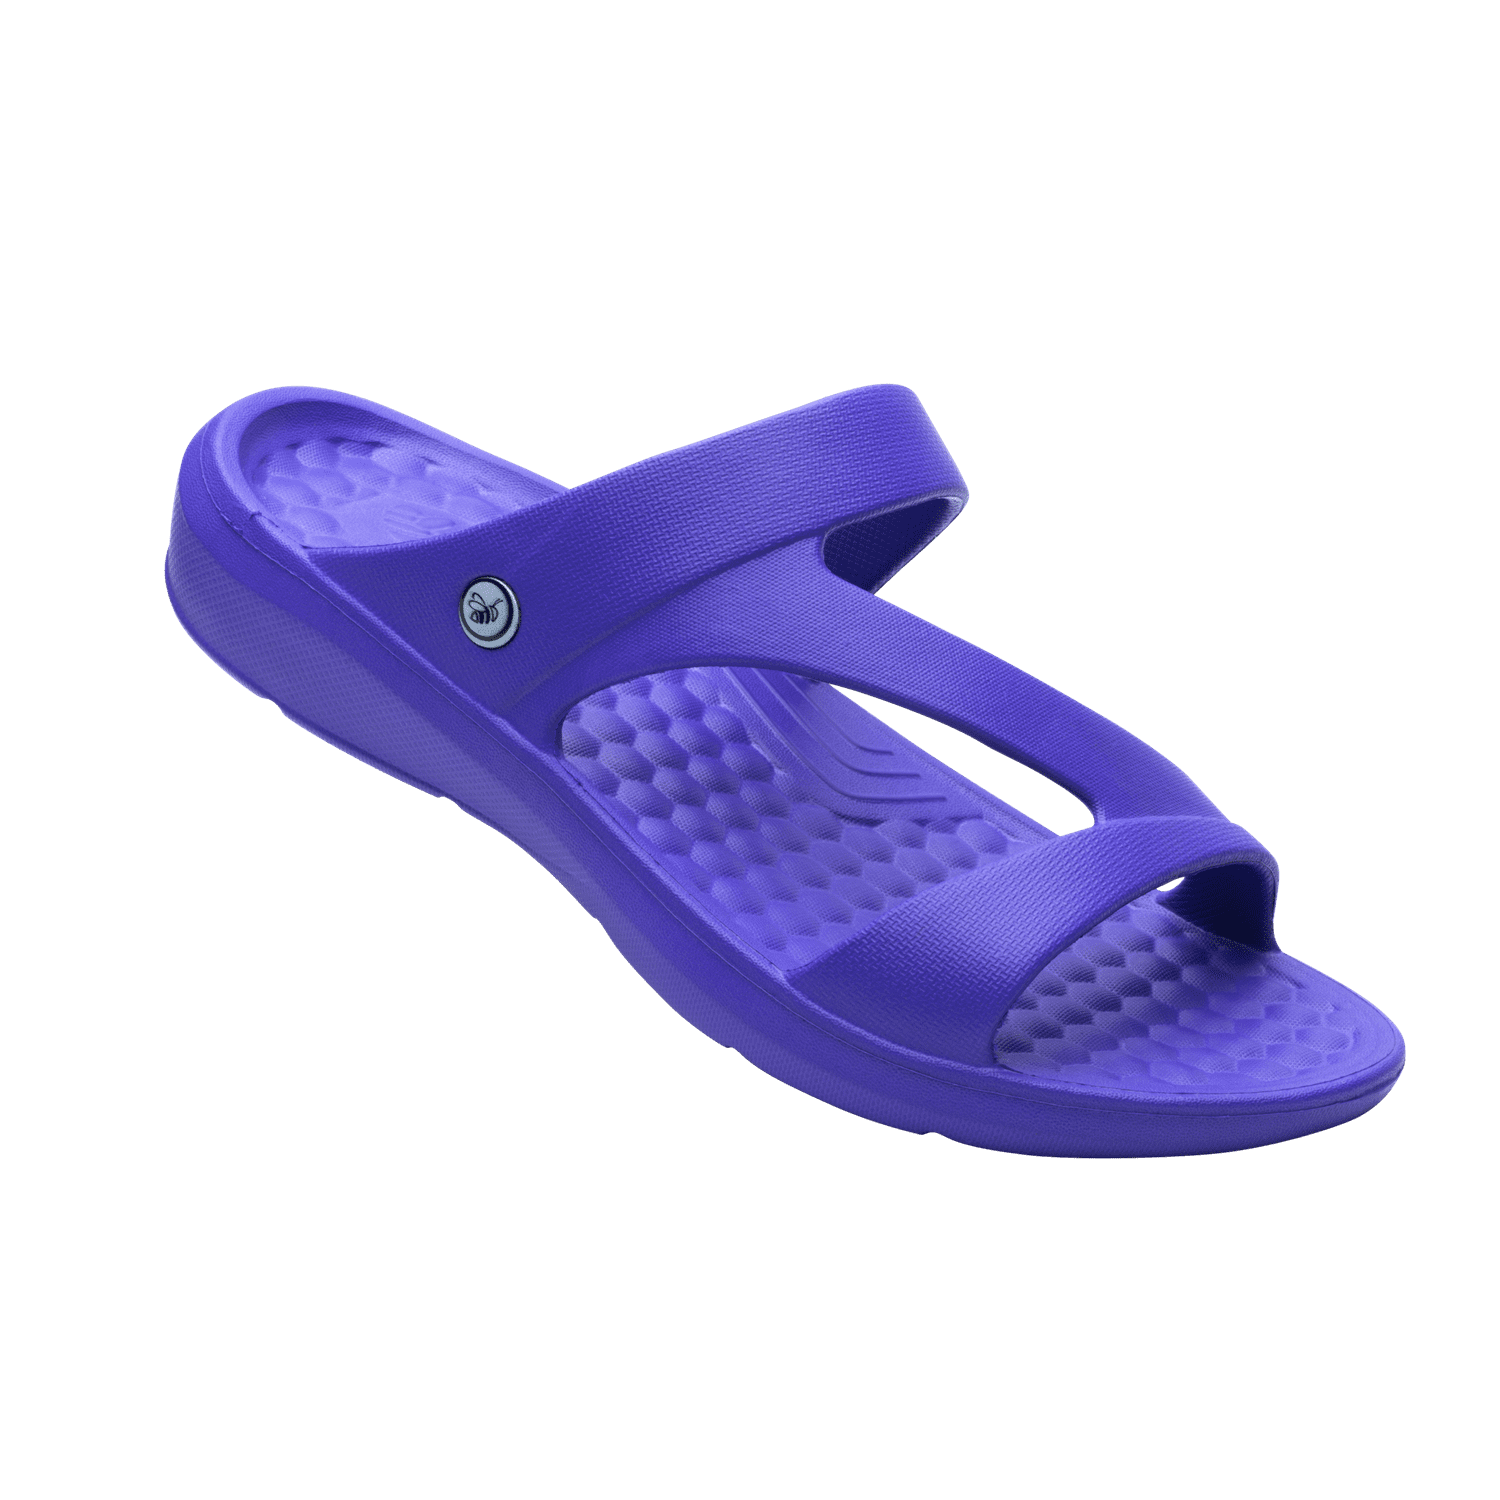 Joybees - Joybees Women's Everyday Sandal | Comfortable, supportive and ...